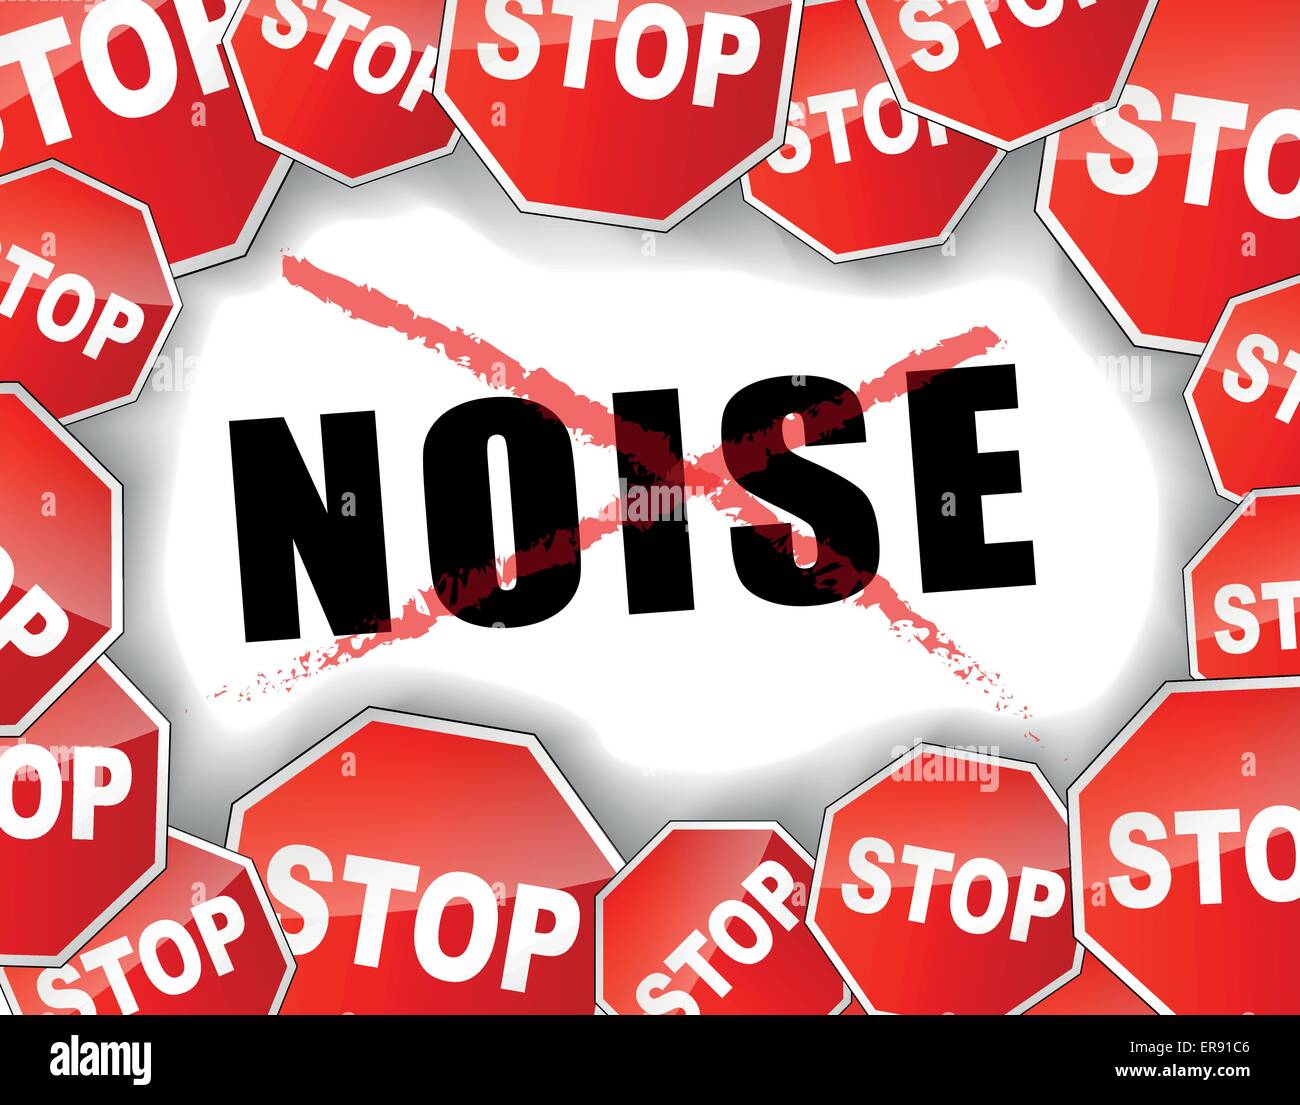 Vector illustration of stop noise concept background Stock Vector